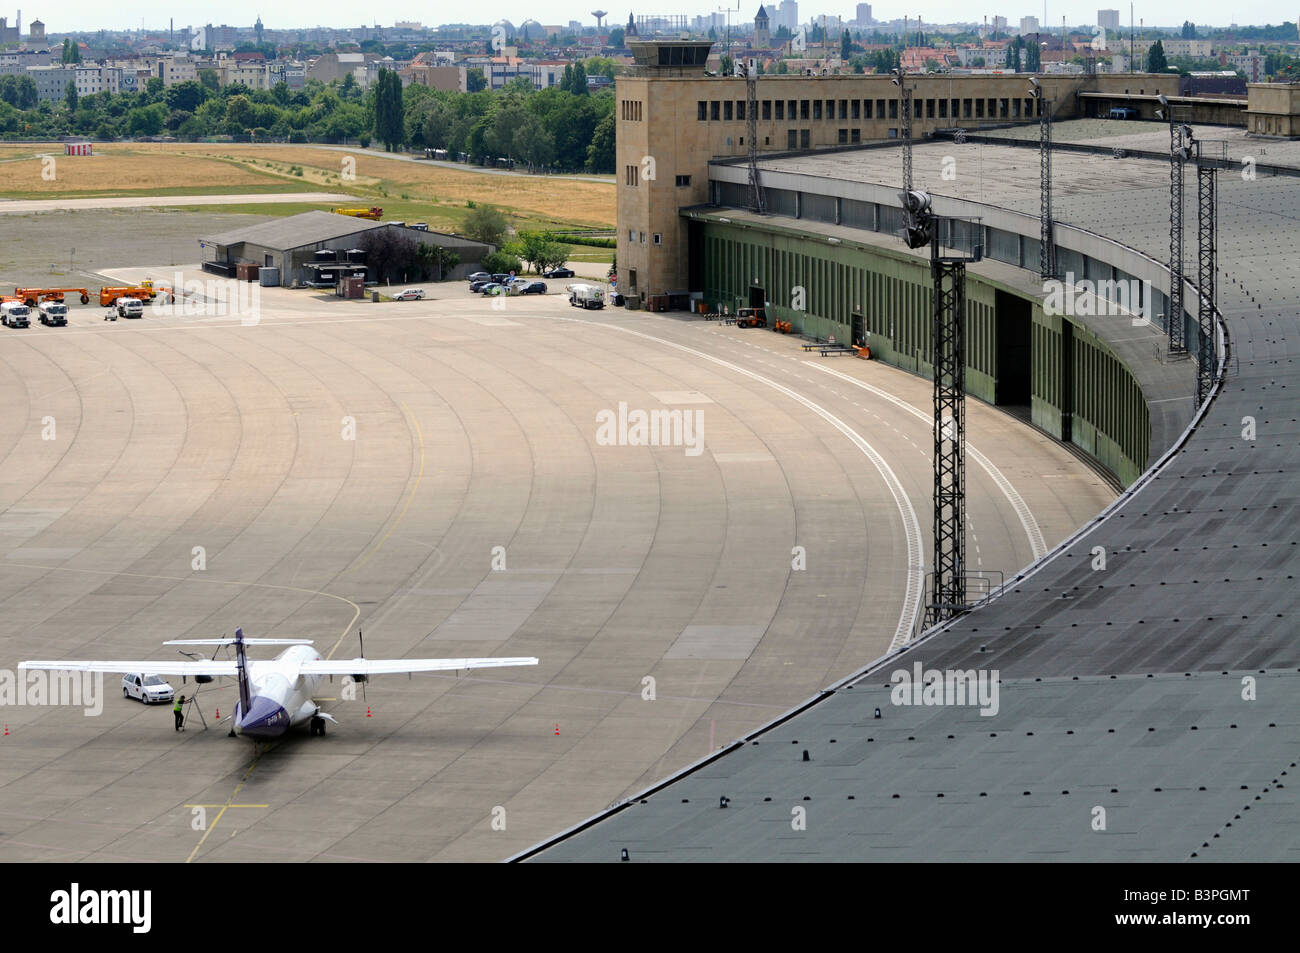 Part of the airport building and the apron area at Berlin Tempelhof Airport, Berlin, Germany, Europe Stock Photo